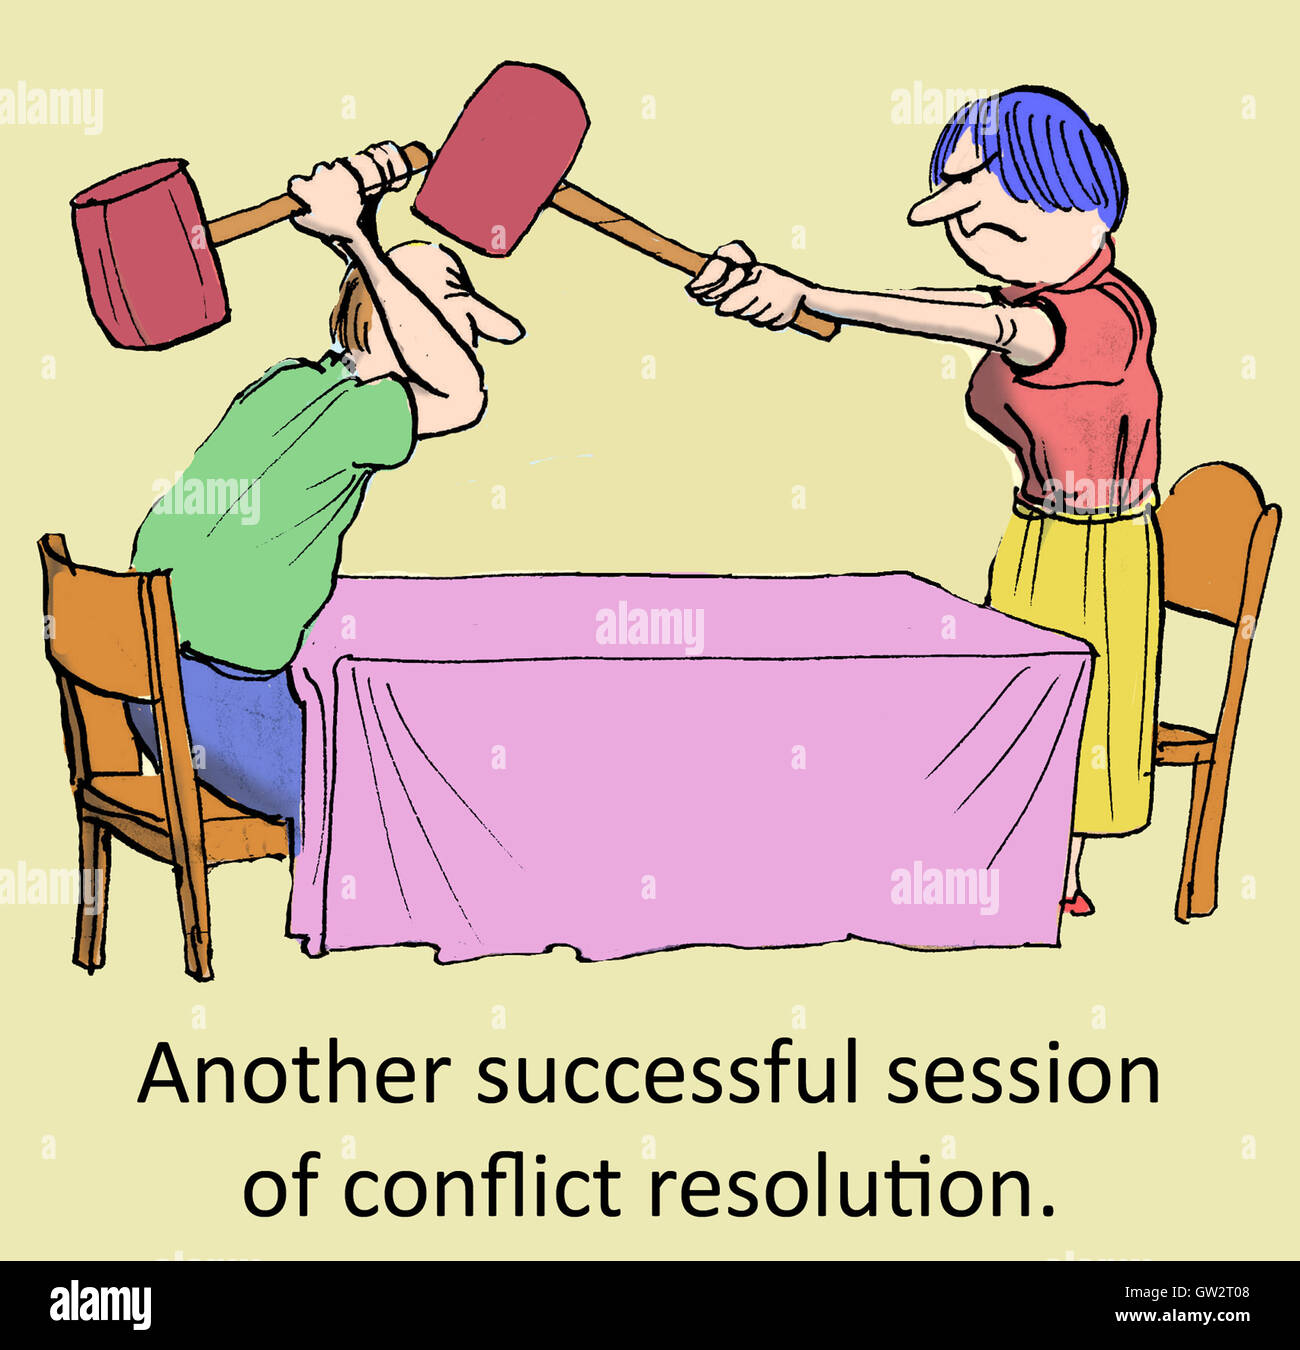 Conflict Resolution Cartoon High Resolution Stock Photography and